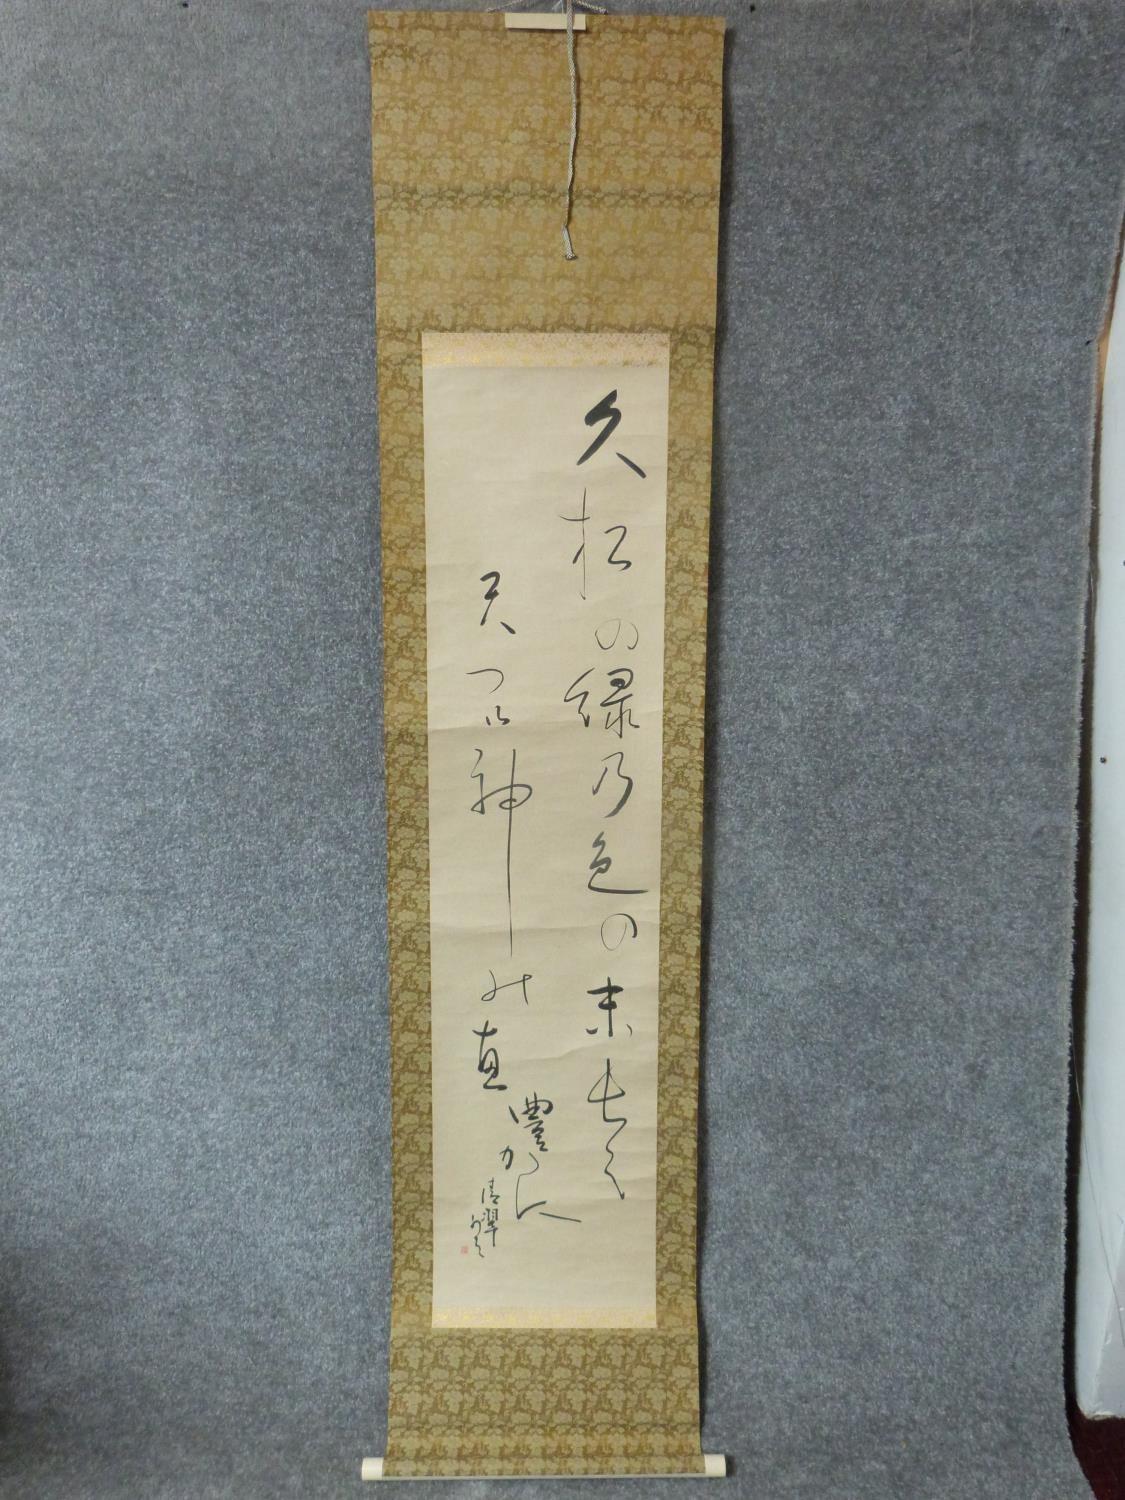 After Shinicai Hisamatsu, ink on paper scroll, faux bone roll, signed with artist's seal. 138x32